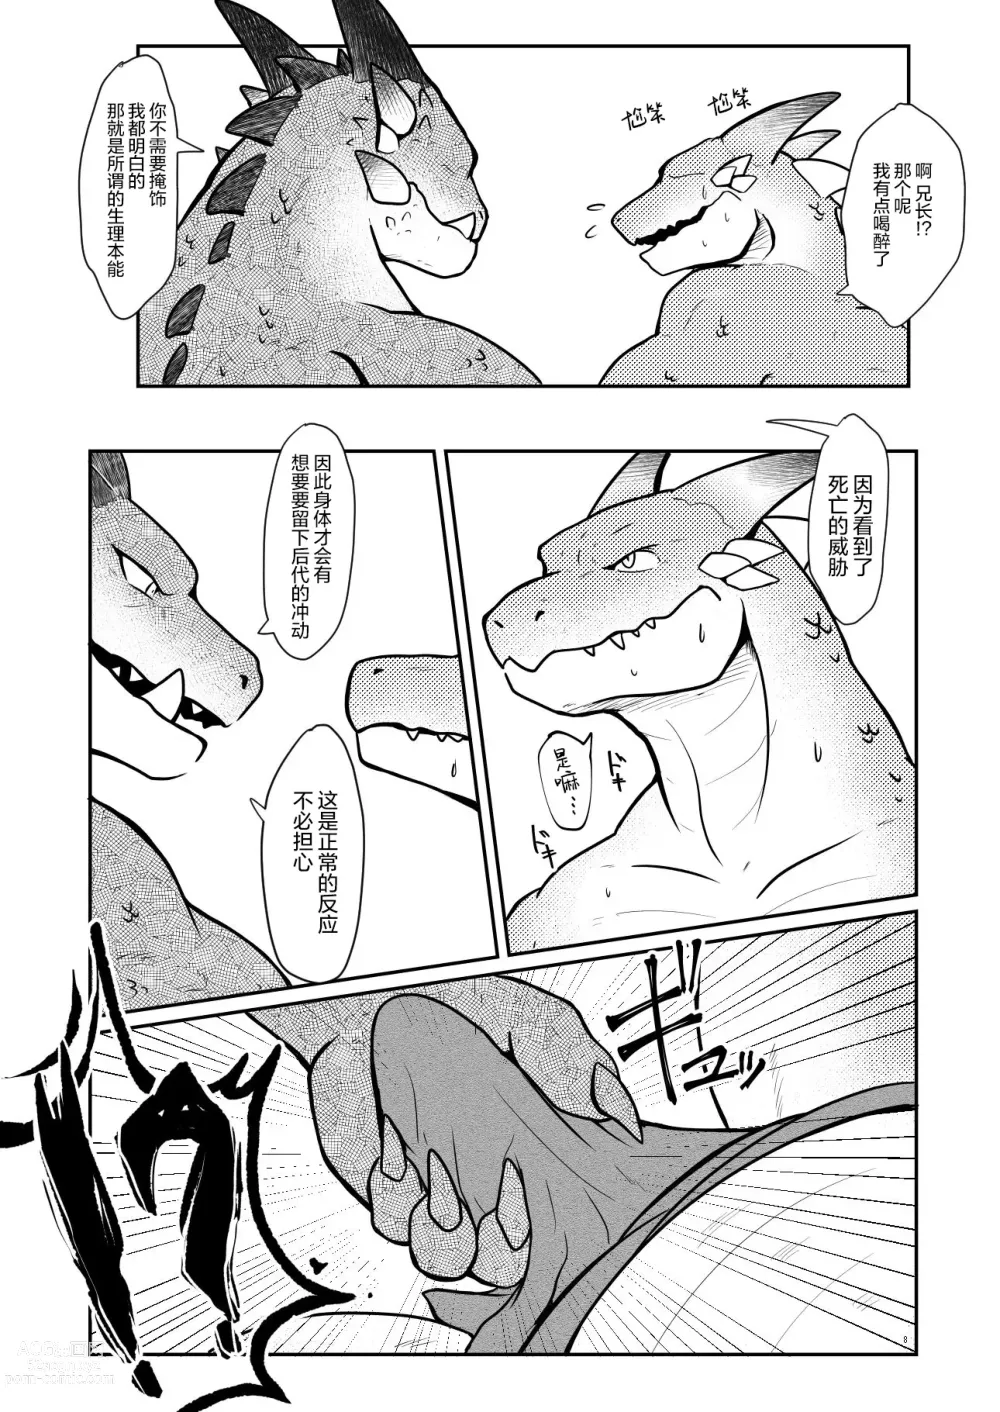 Page 8 of doujinshi 砰砰砰心乱跳